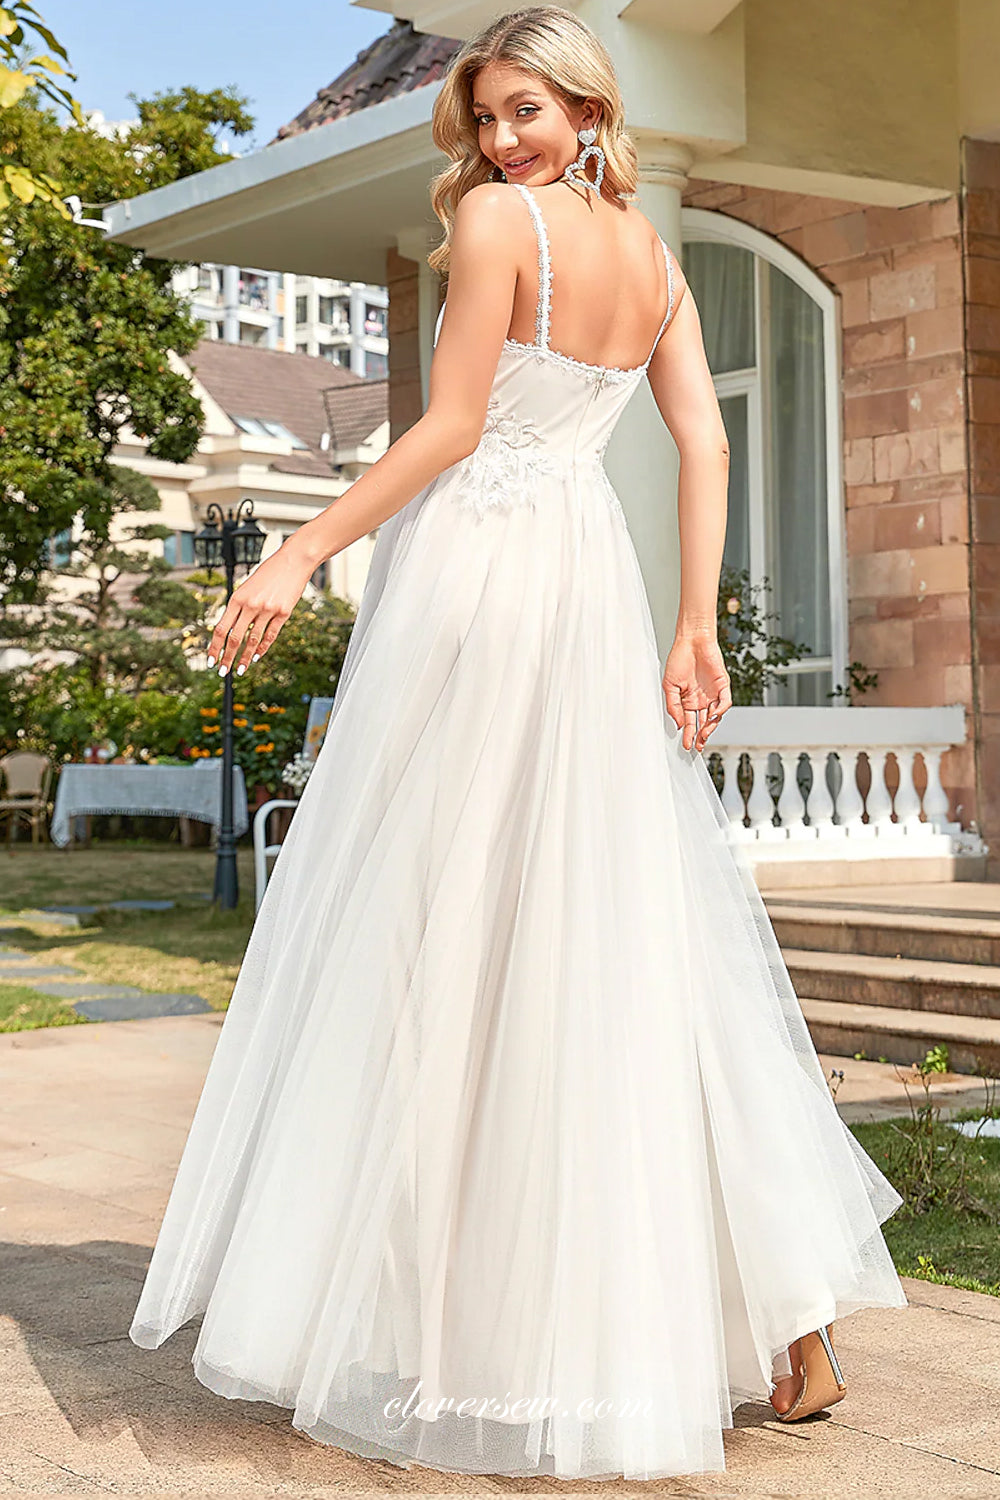 White Tulle Sleevess Lace Applique A-line Country Wedding Dresses, CW0312